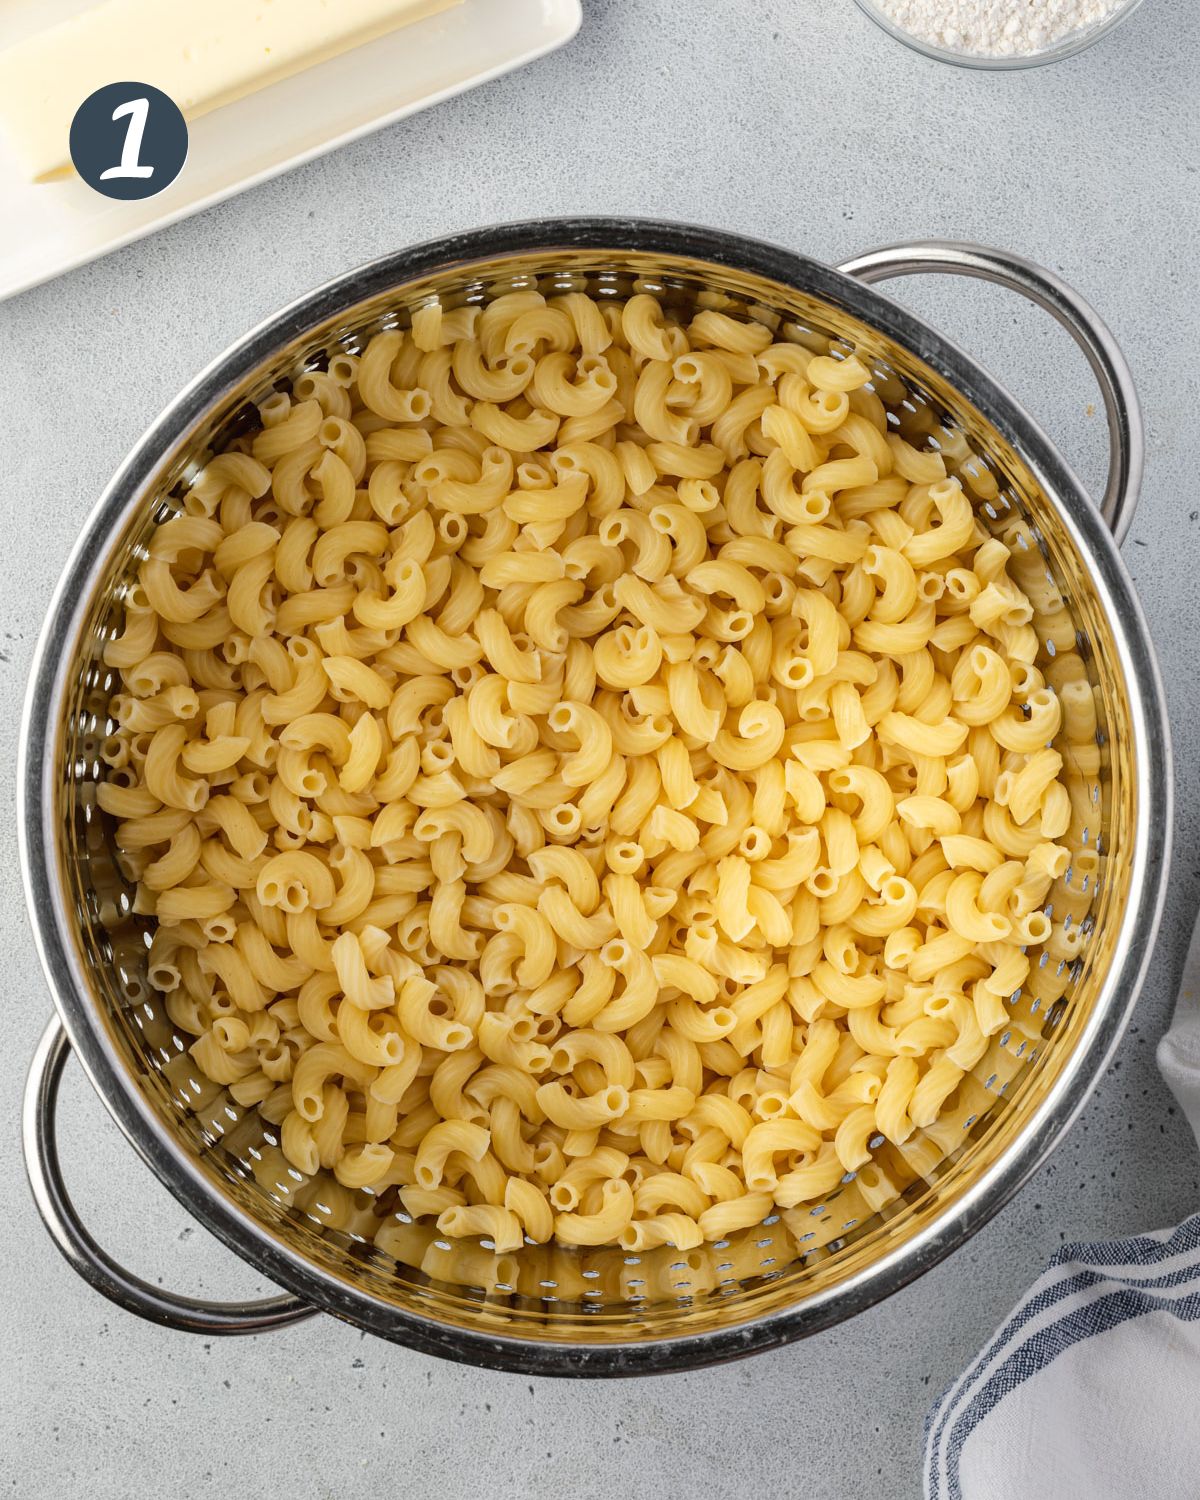 Macaroni noodles in a stainless colander.